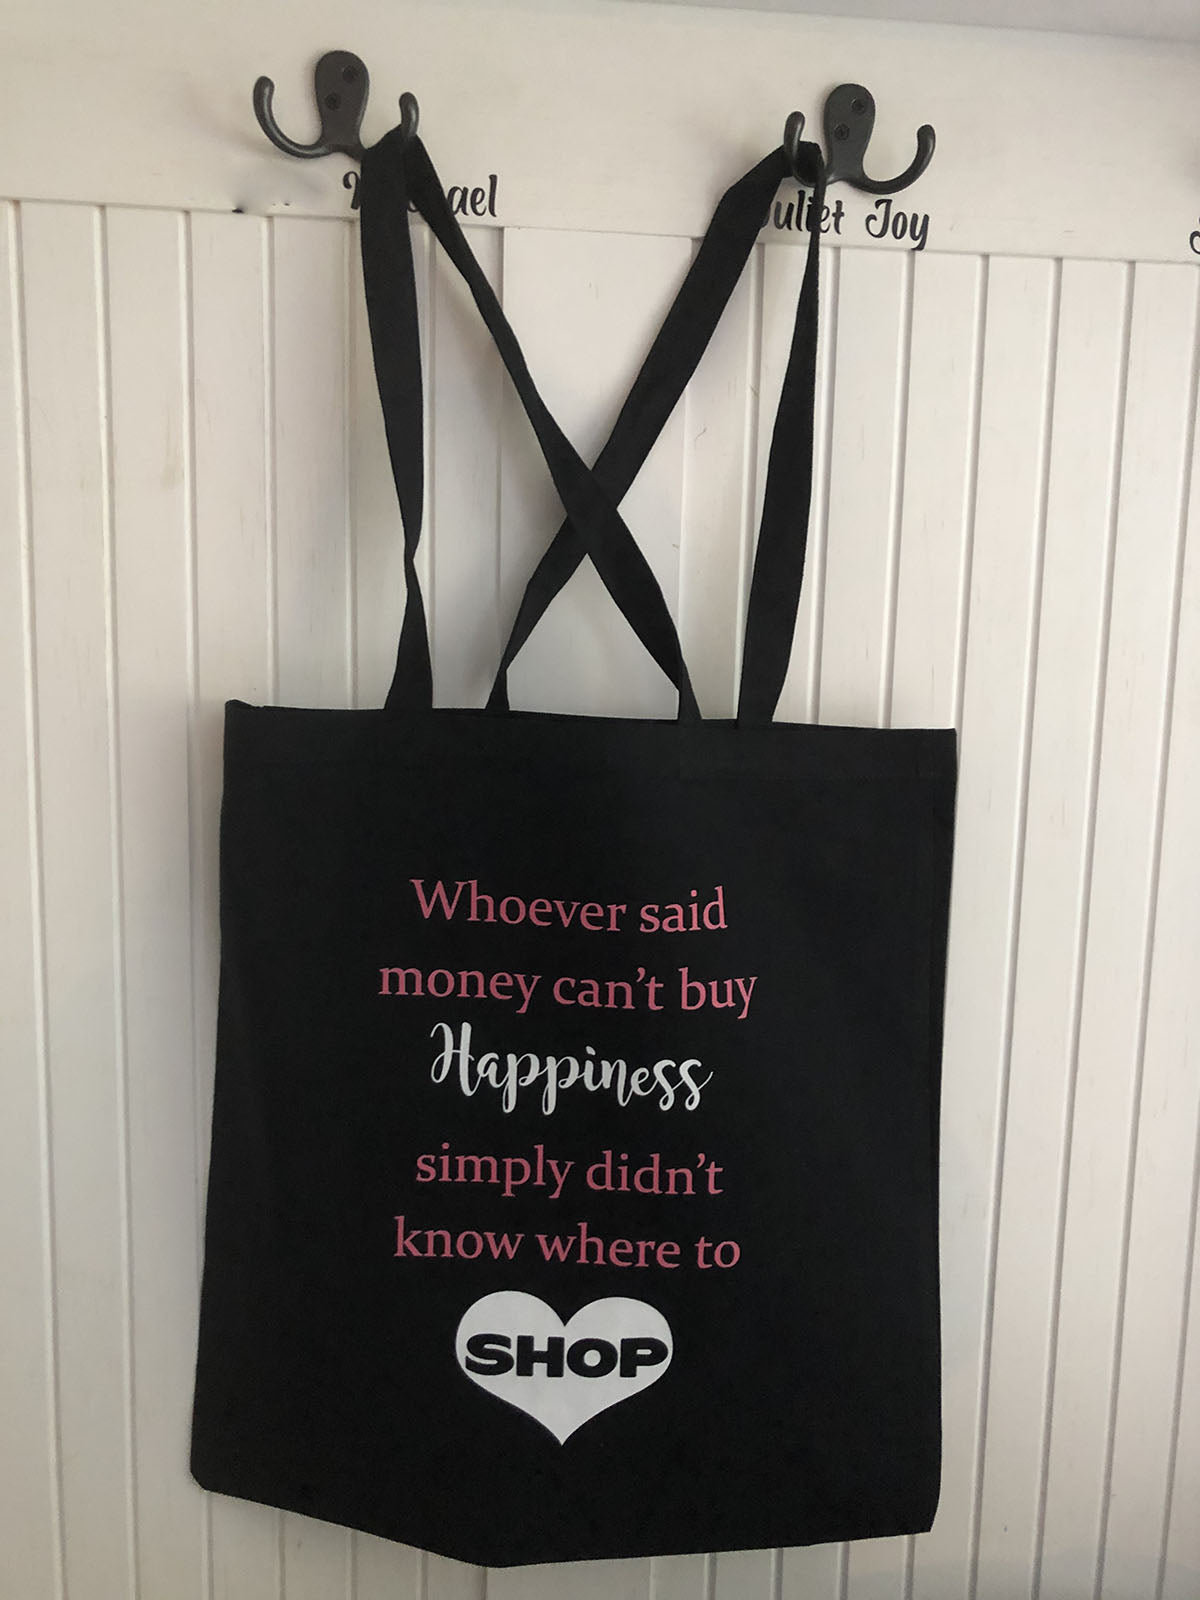 Whoever said money can't buy happiness tote bag